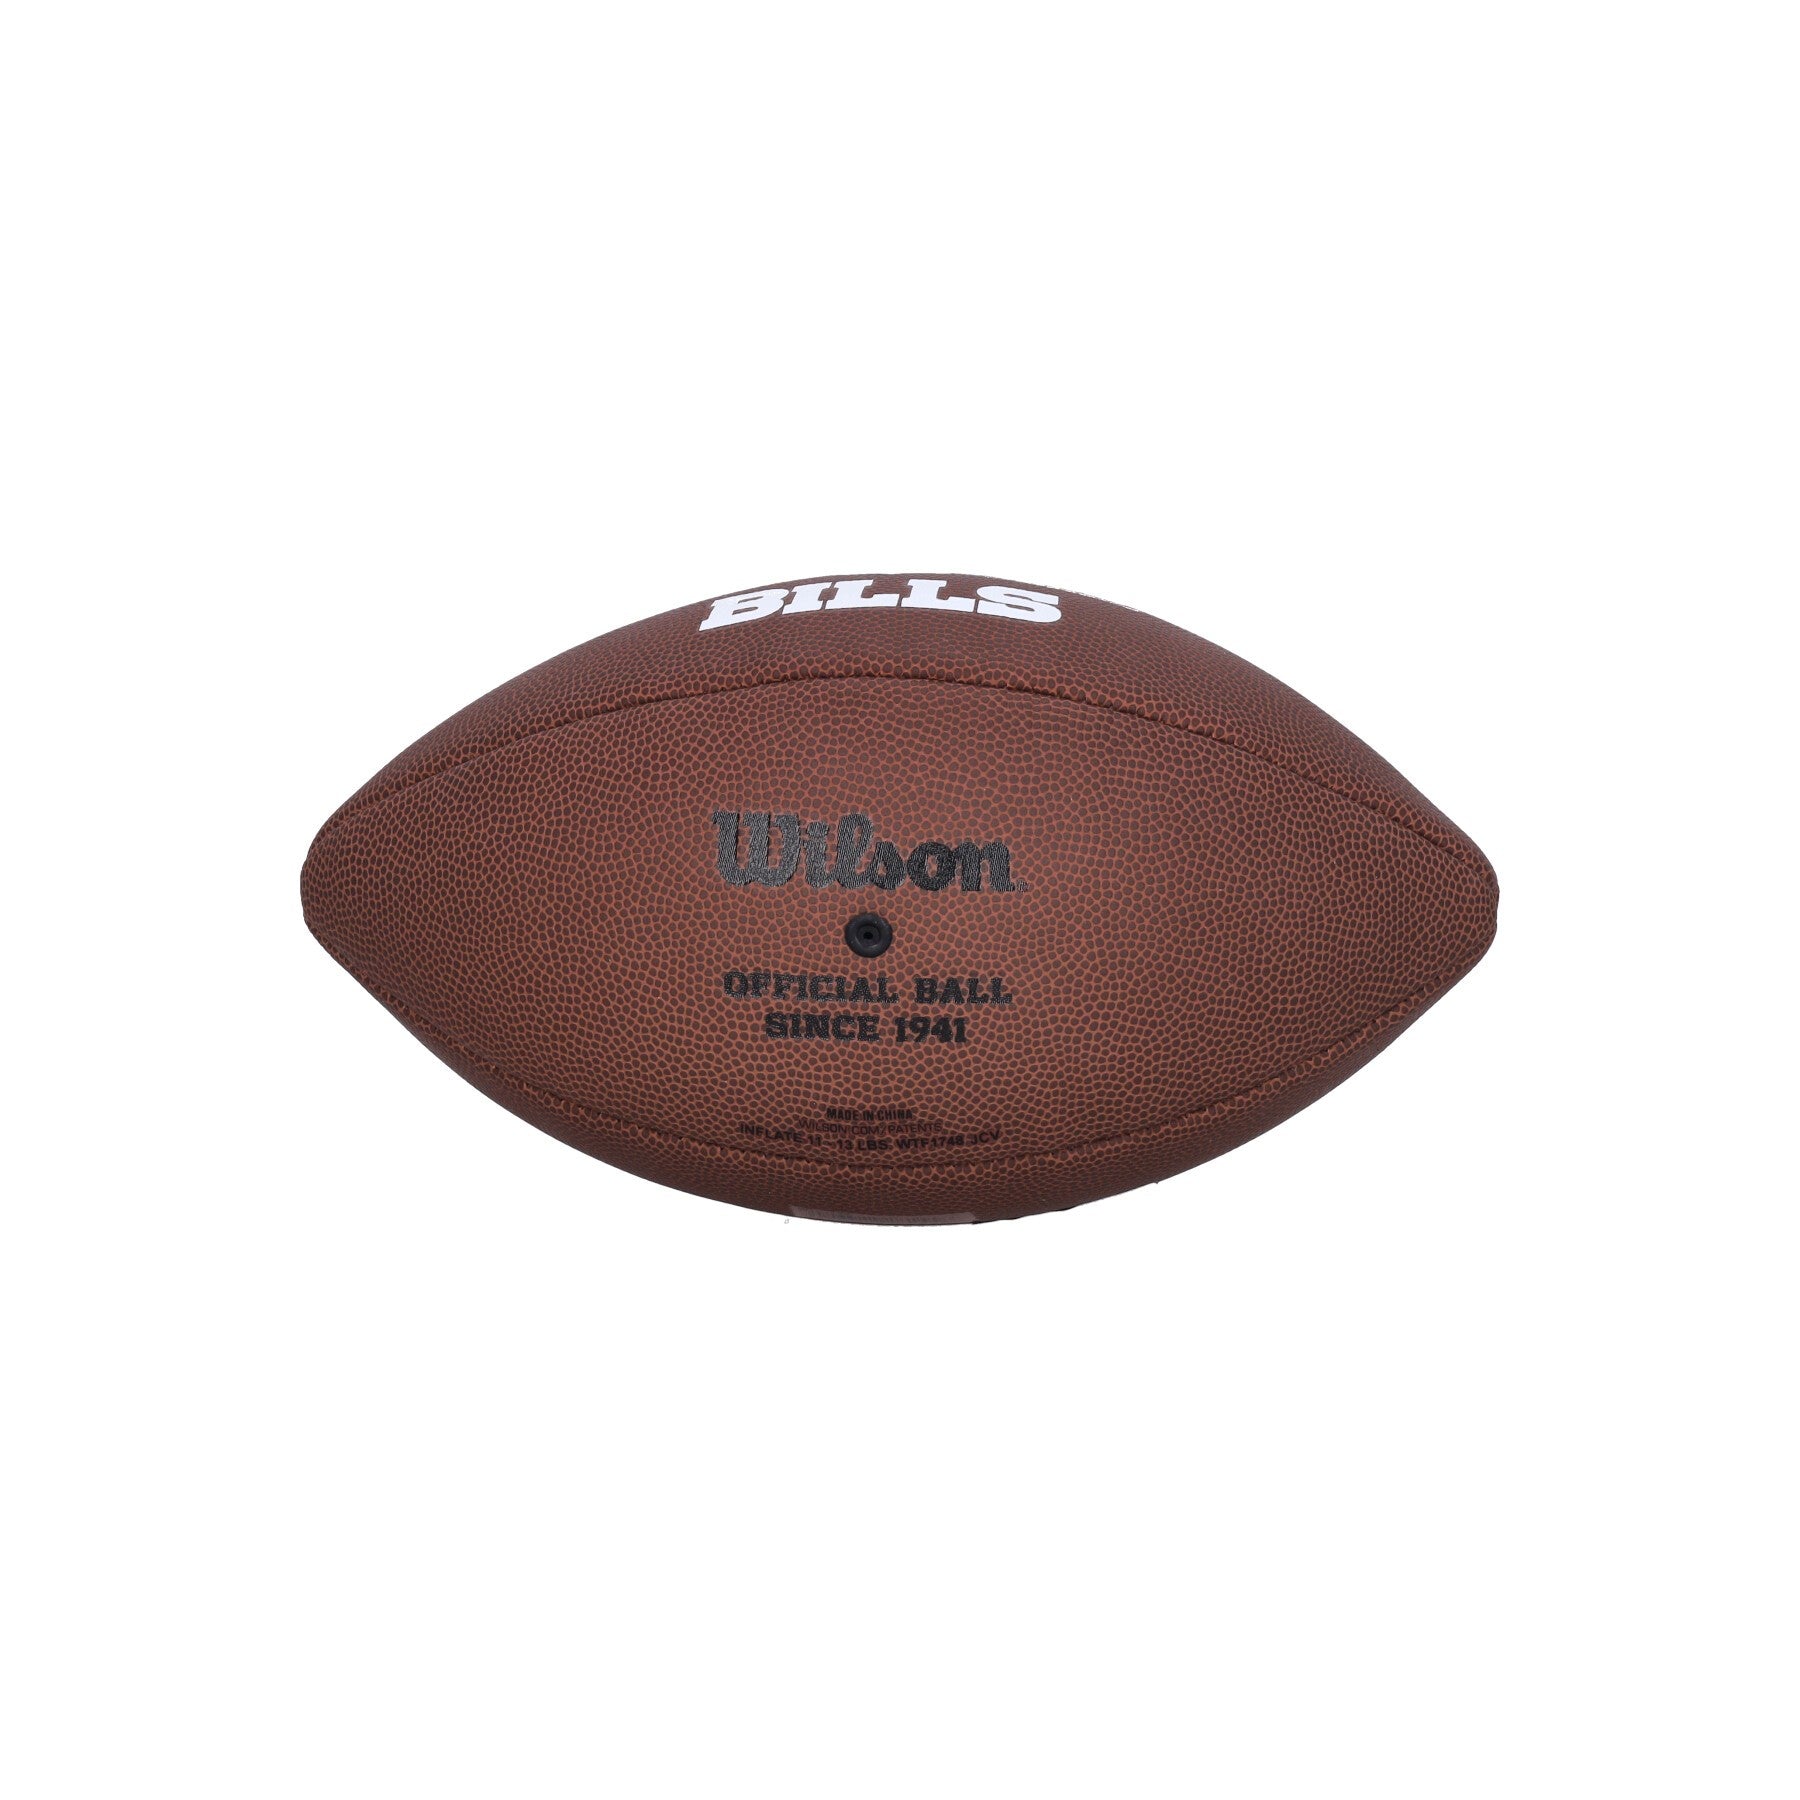 Pallone Uomo Nfl Licensed Football Bufbil Brown